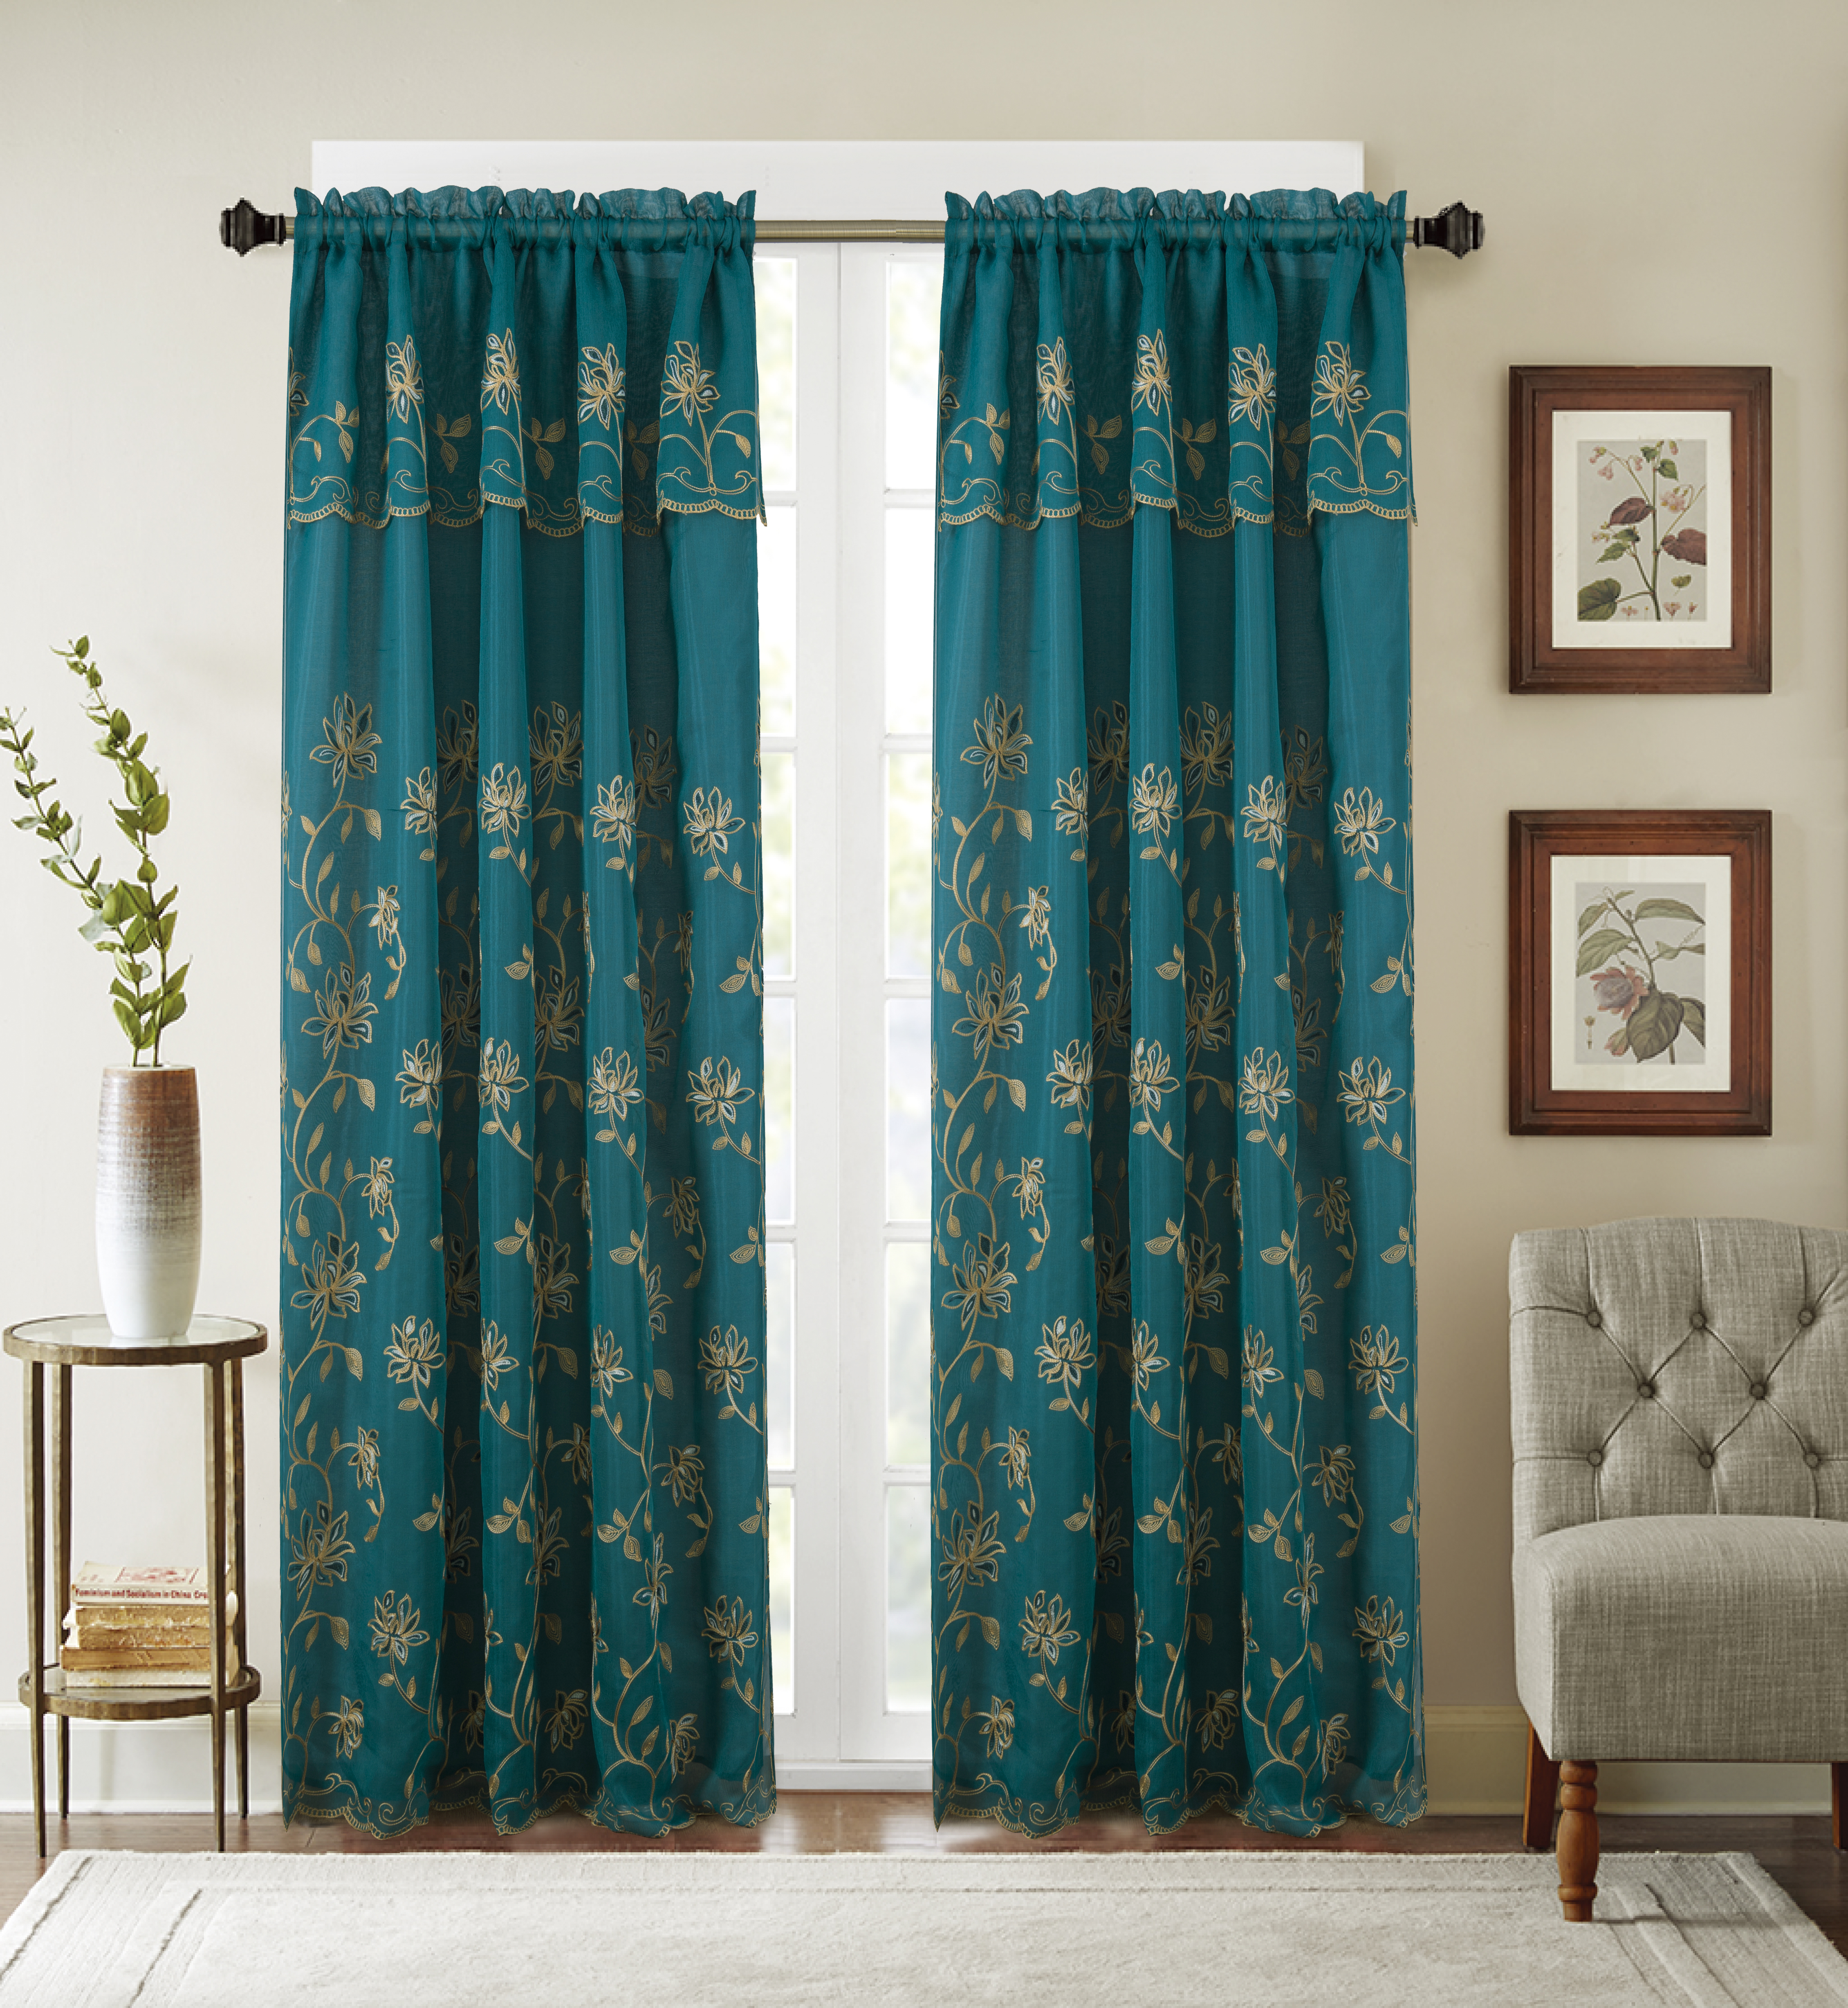 Shower Curtain With Attached Valance, Fabric Shower Curtains With Attached Valance